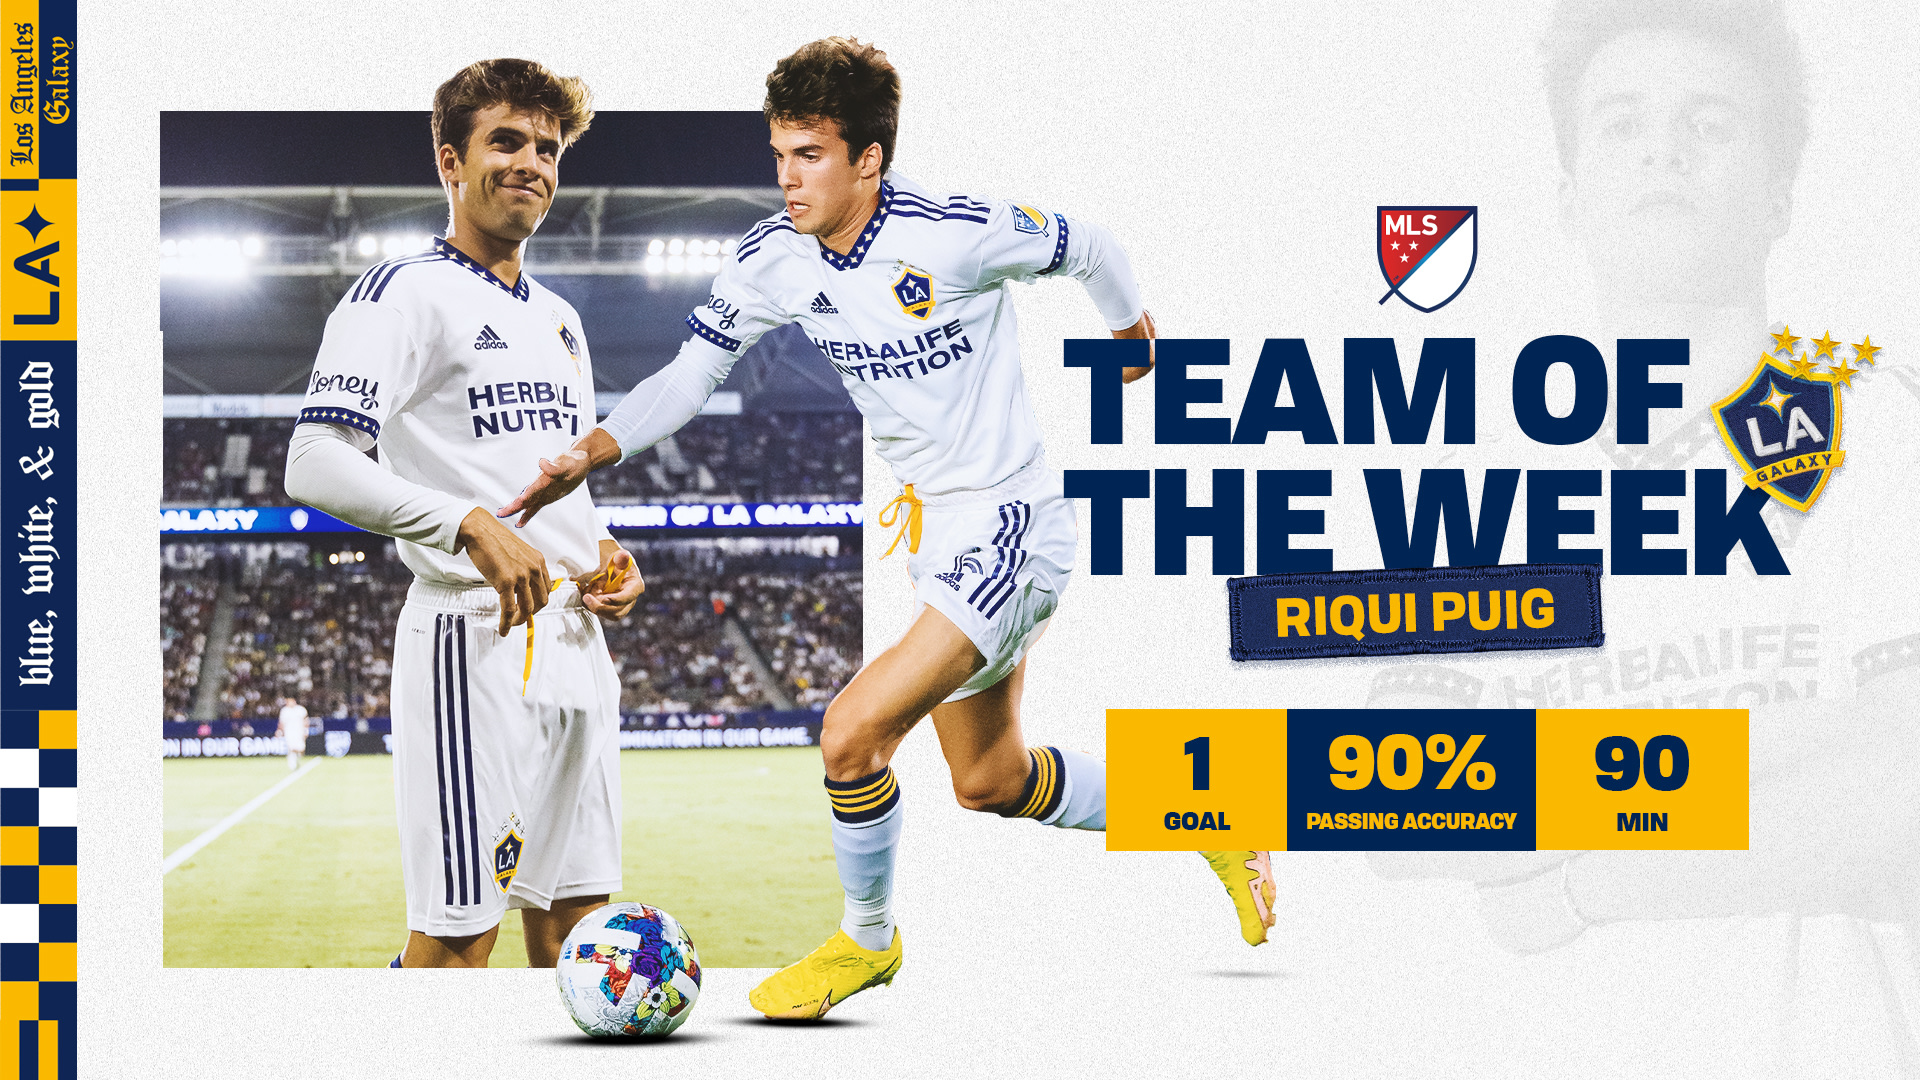 Riqui Puig named to MLS Team of the Week presented by Audi